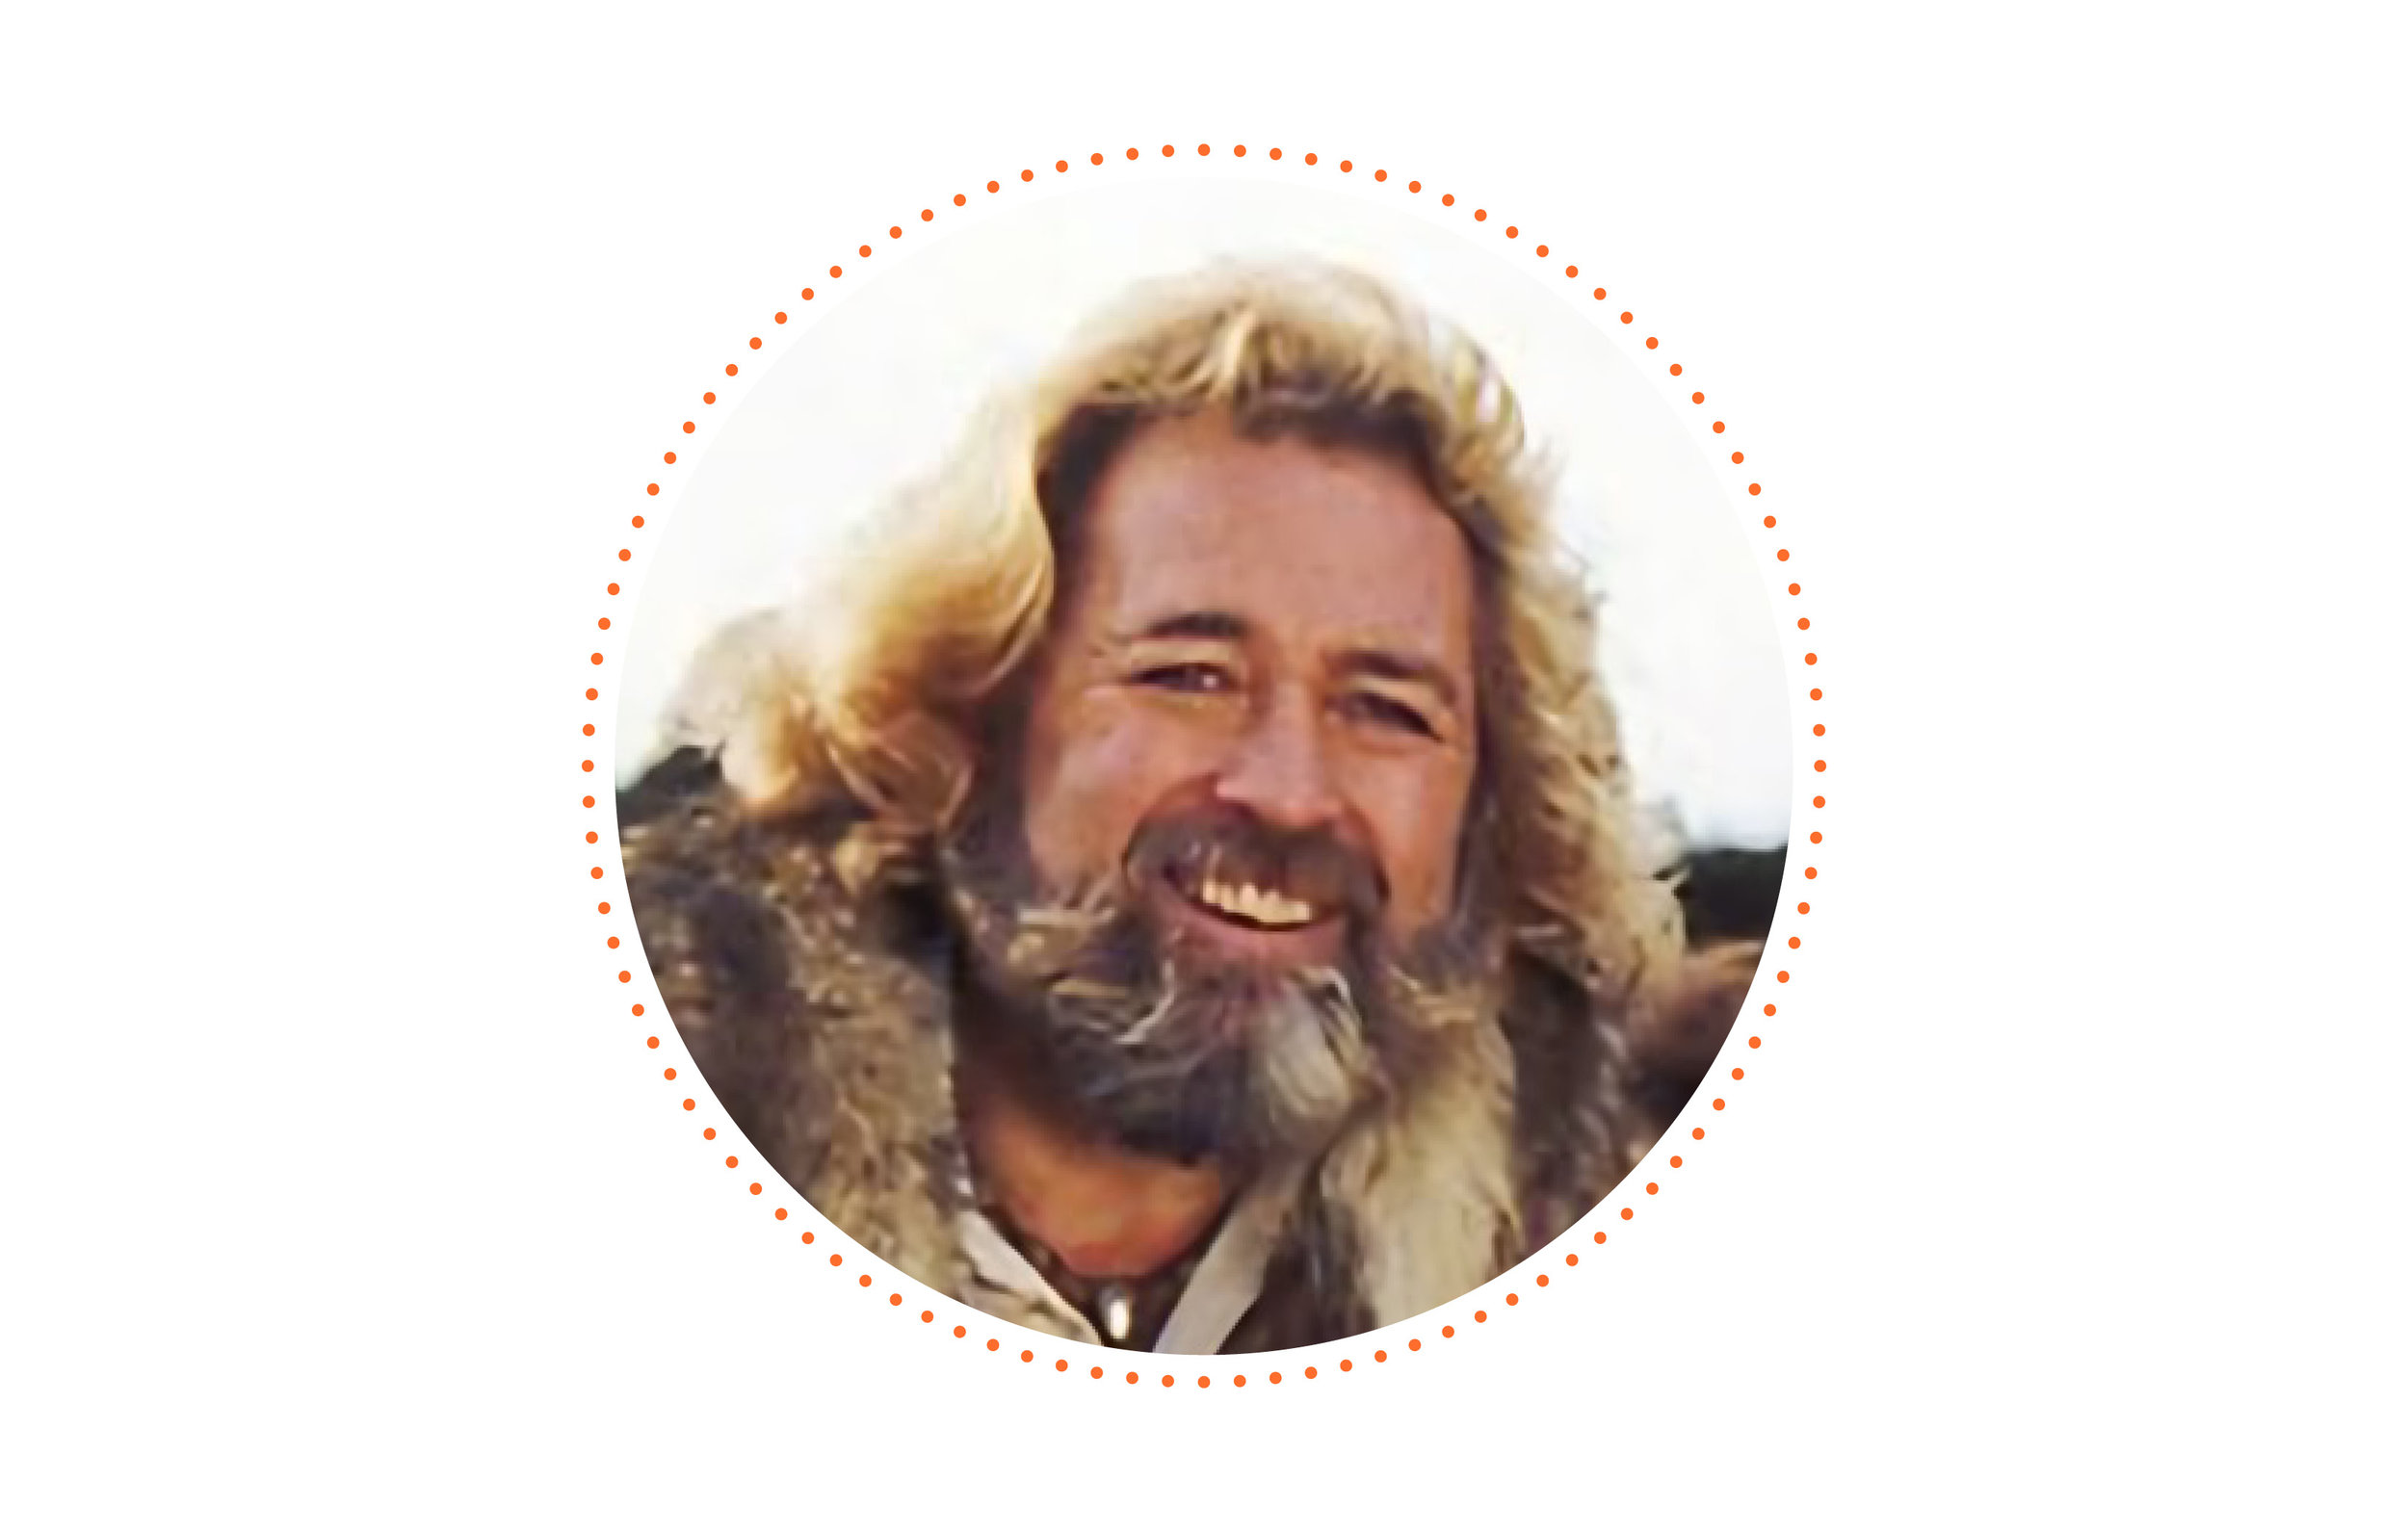 Brush with Celebrity? - I met Grizzly Adams (the actor Dan Haggerty) and admitted I had a crush on him when I was a little girl.